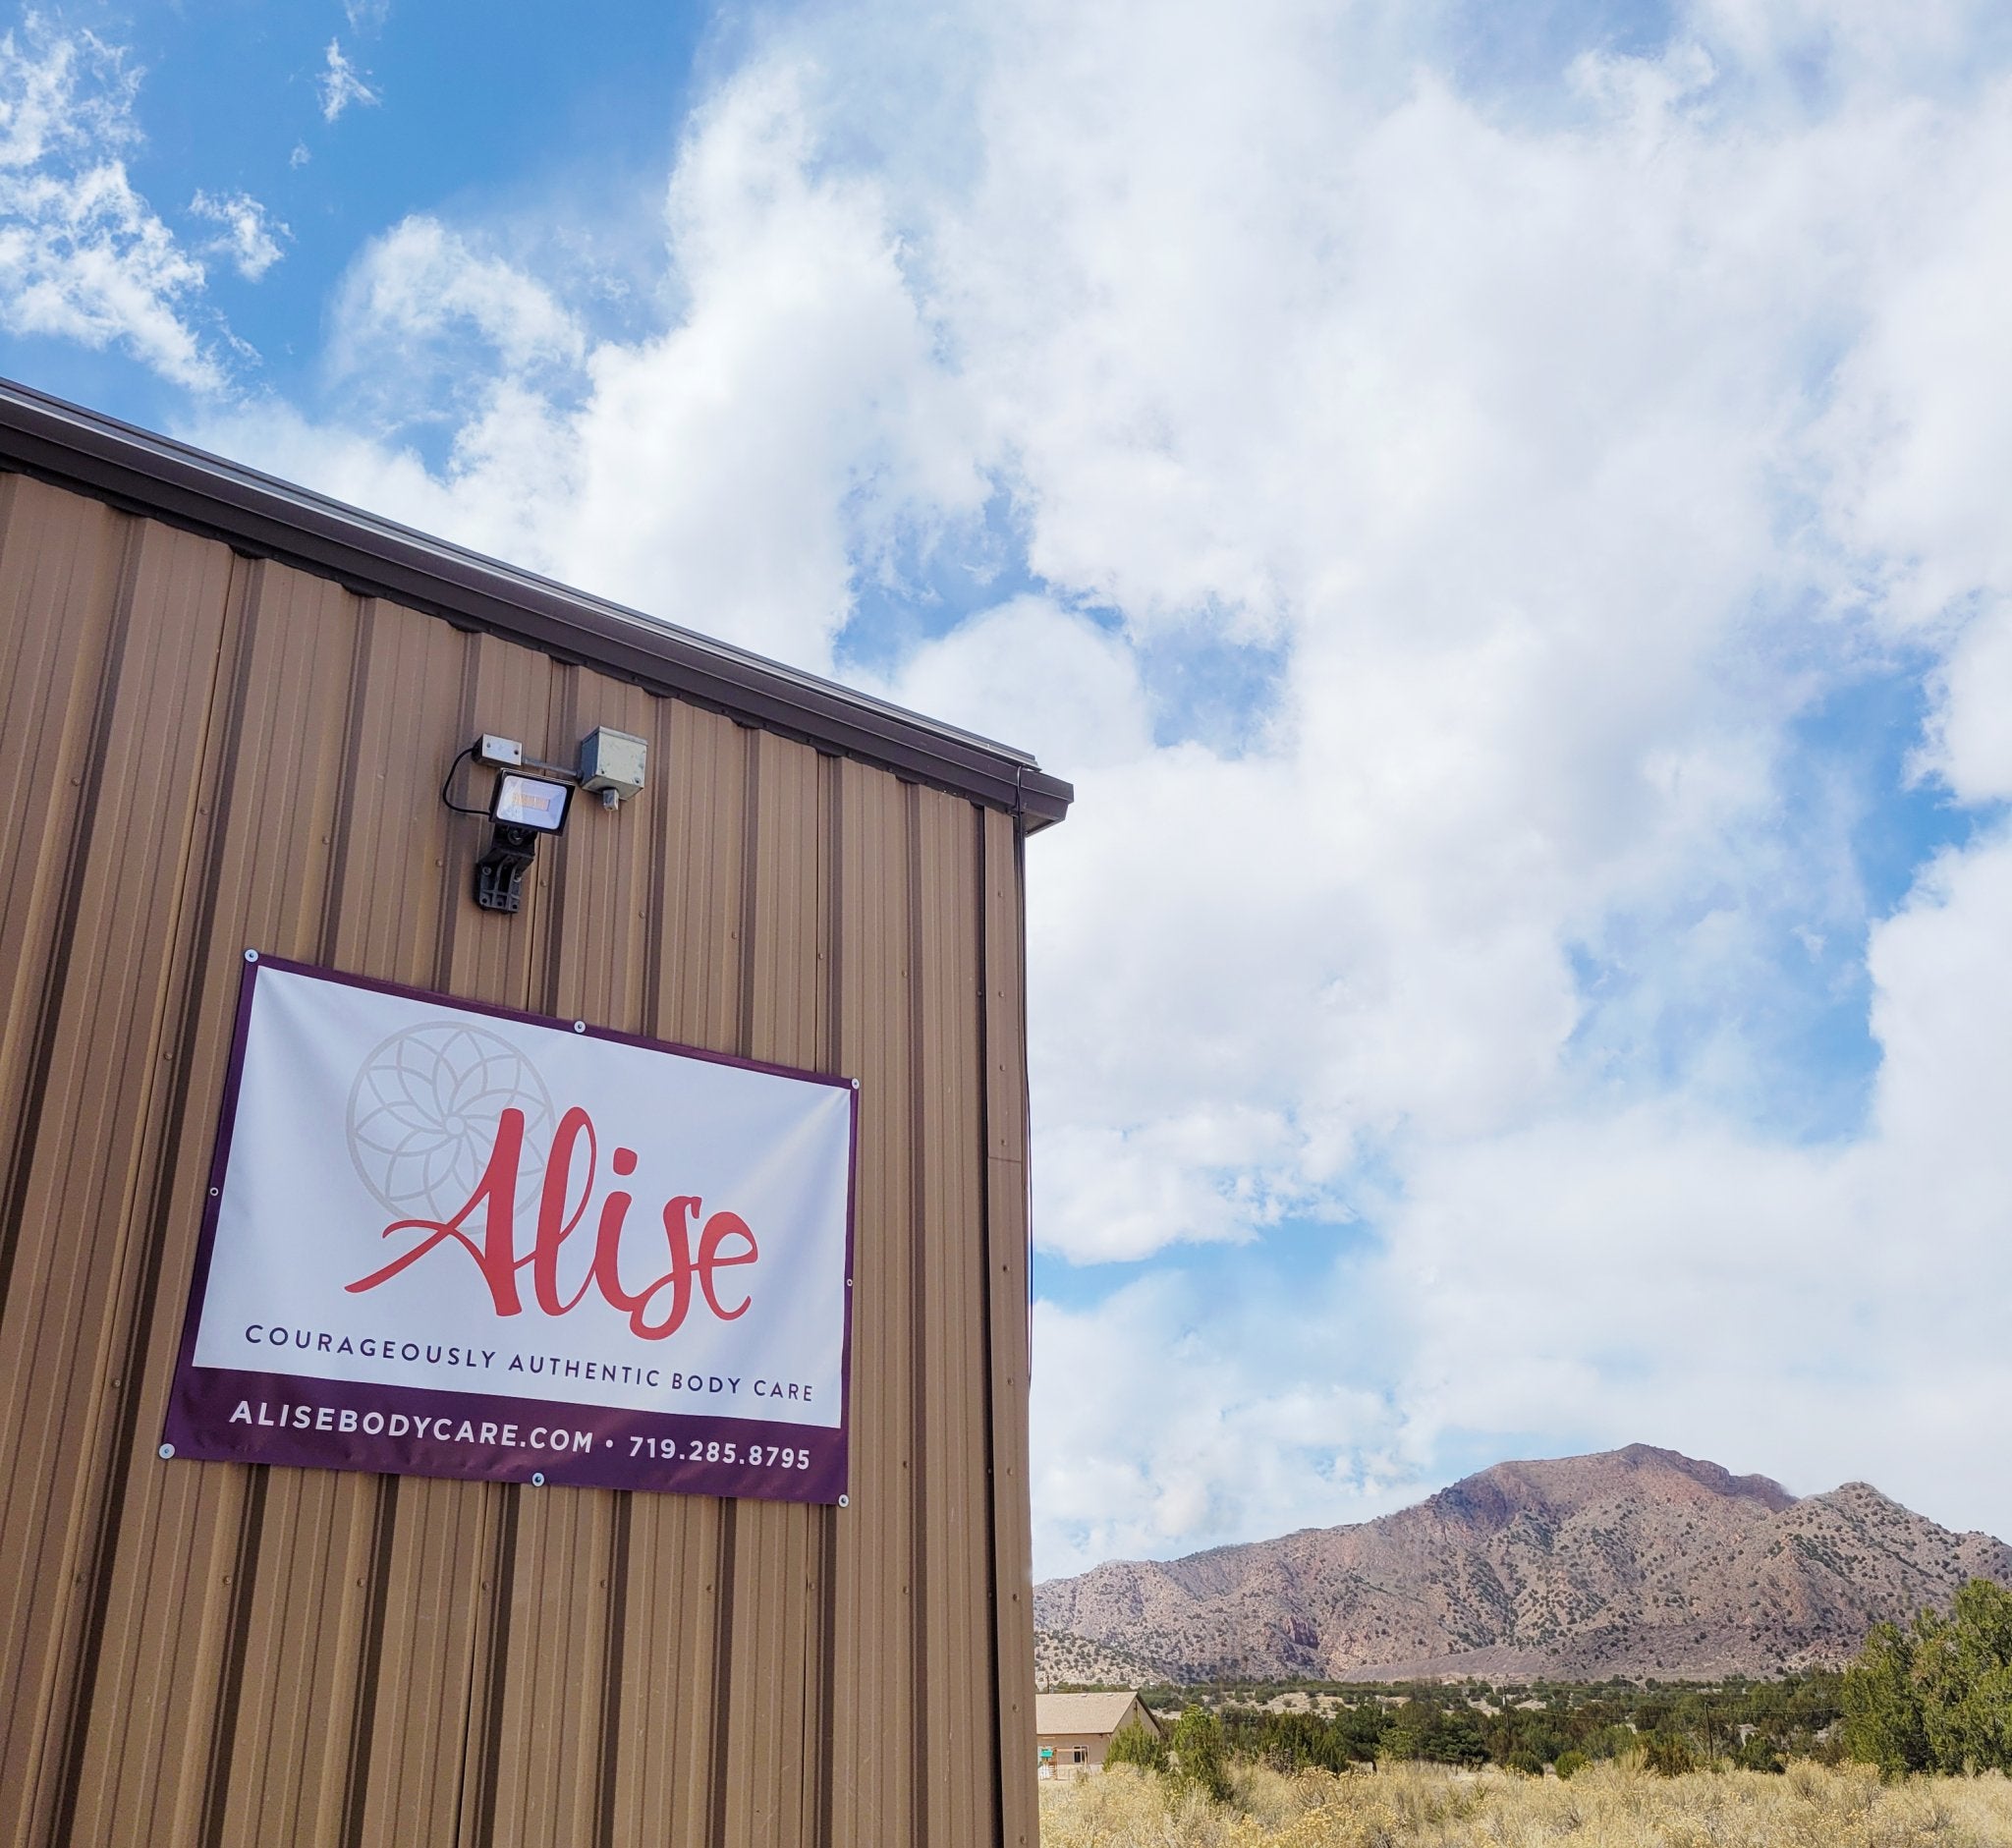 Exterior photo of Alise Body Care manufacturing building in Colorado